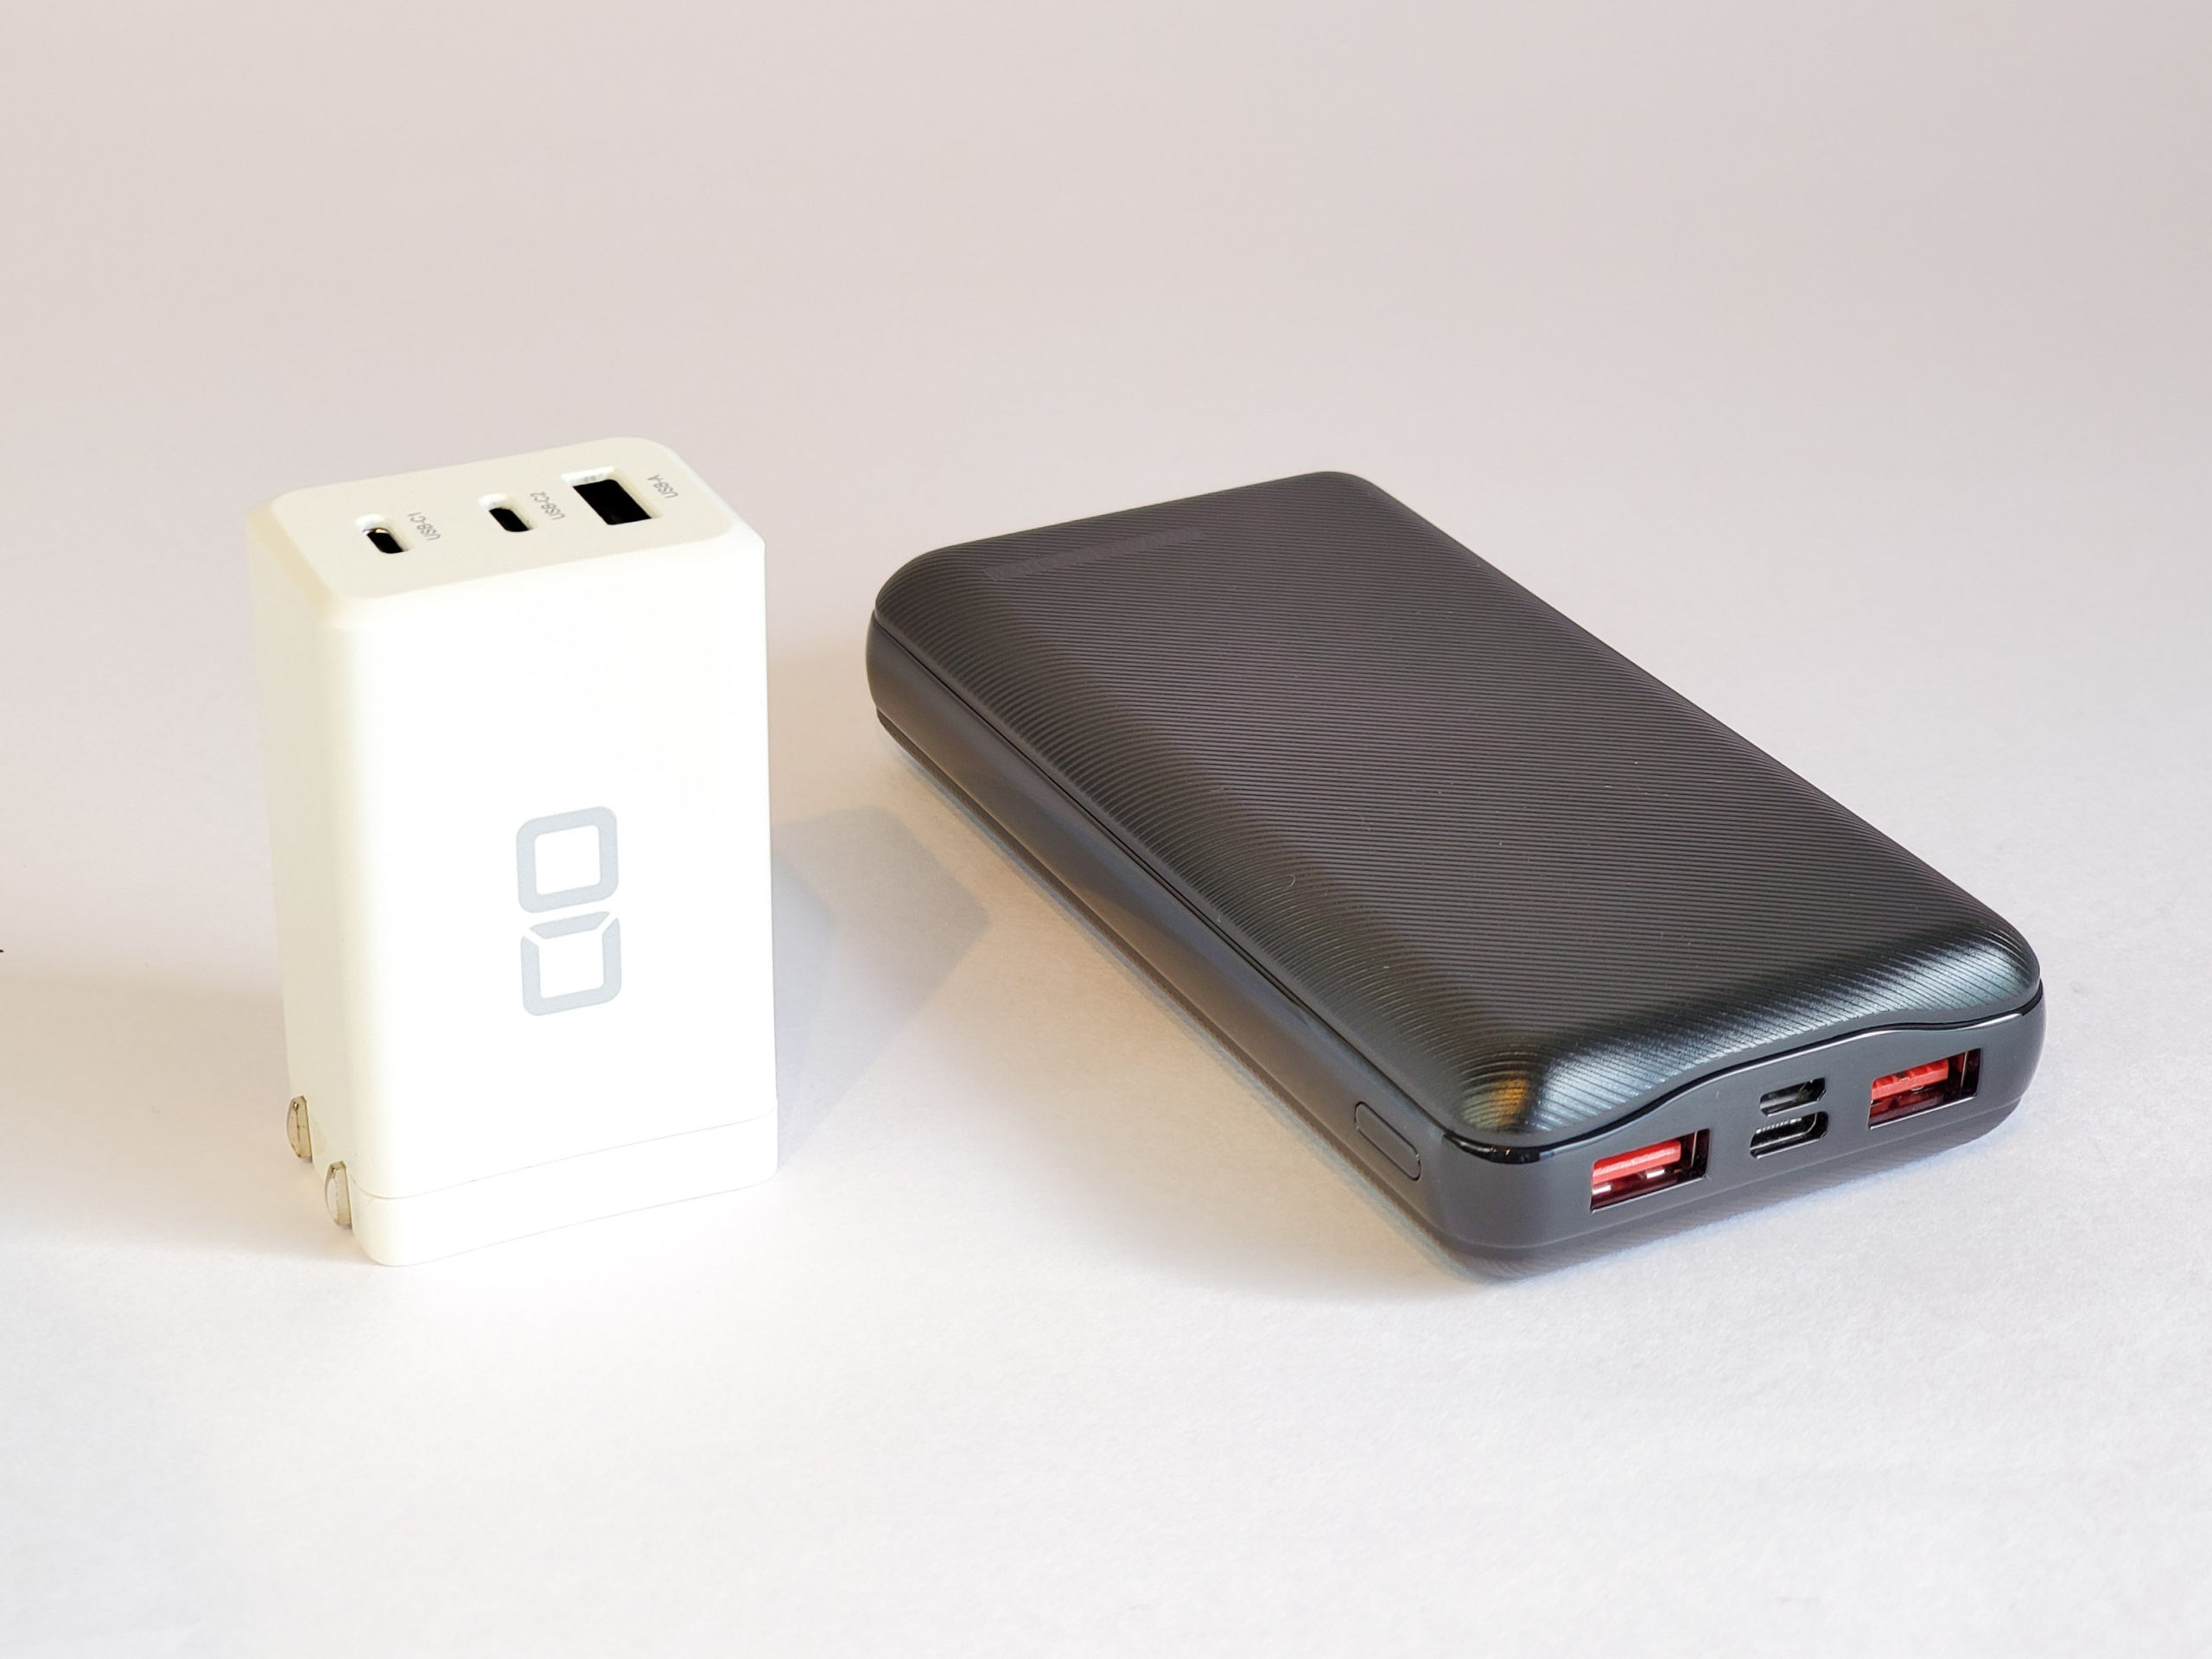 SMARTCOBY20000 PD60W 実機レビュー 入出力60W・20000mAh・PPS対応の 